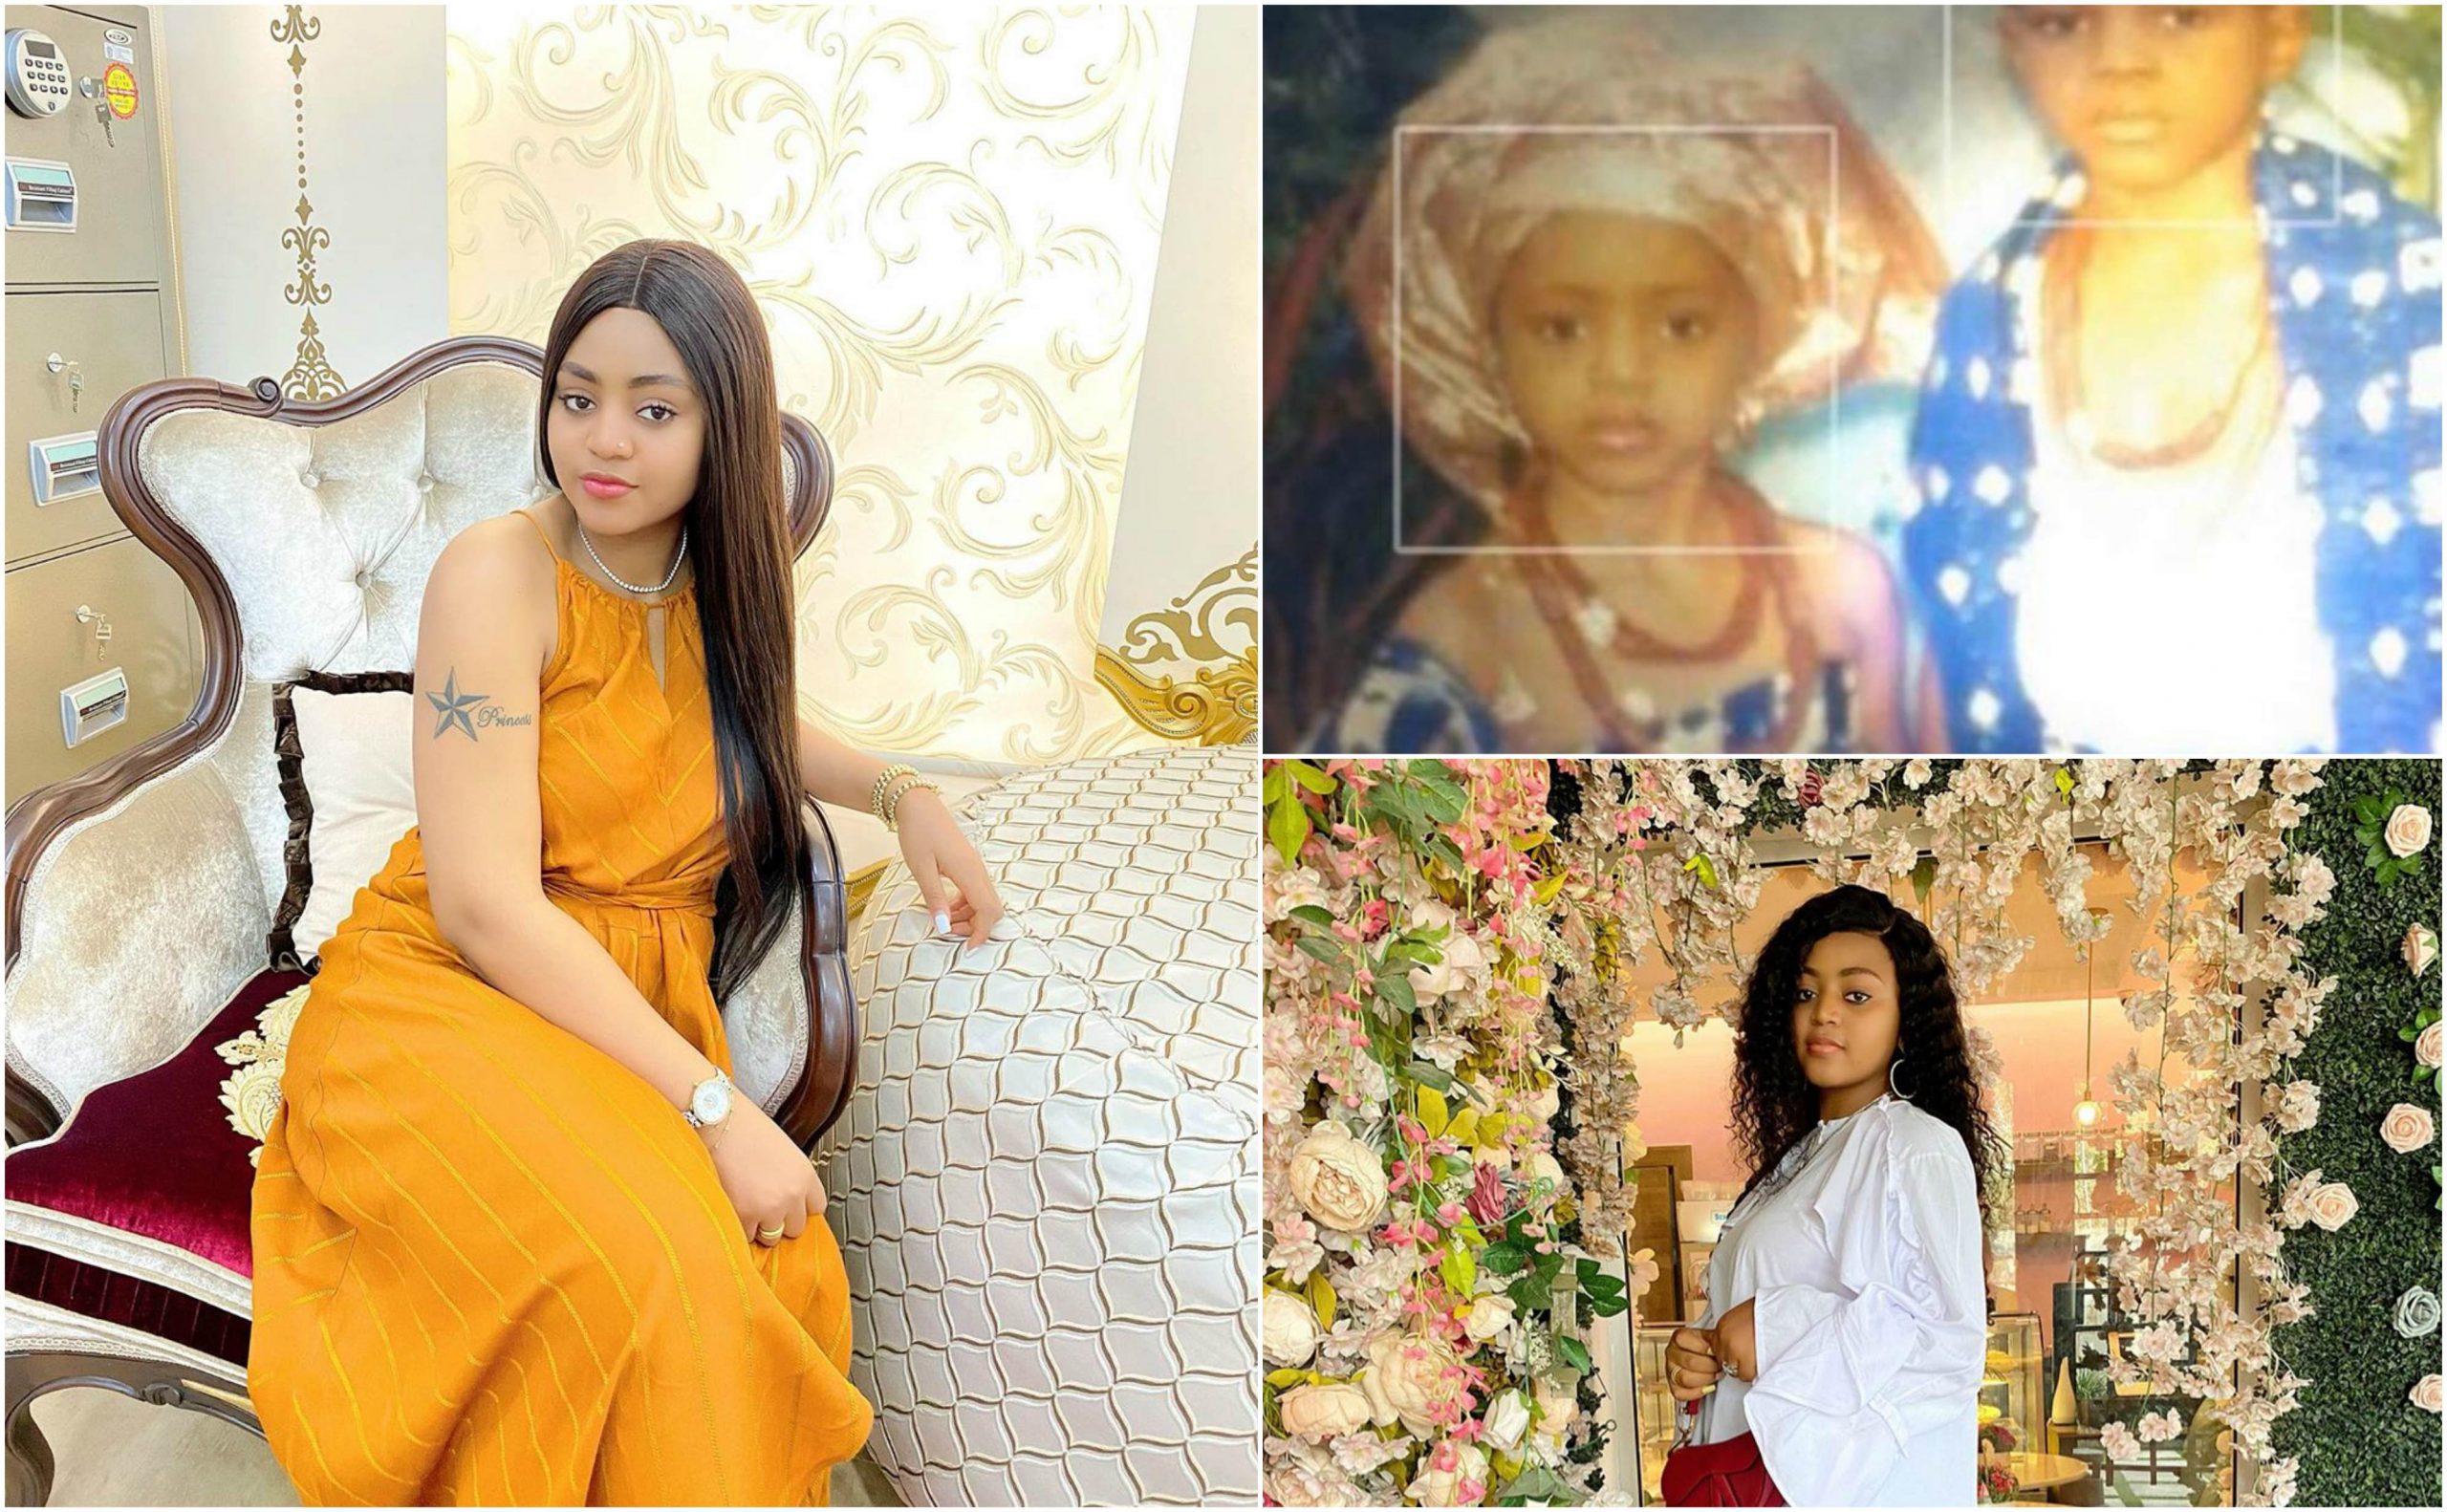 Regina Daniels Shares Childhood Photo of Herself: She Never Changed - Check Out